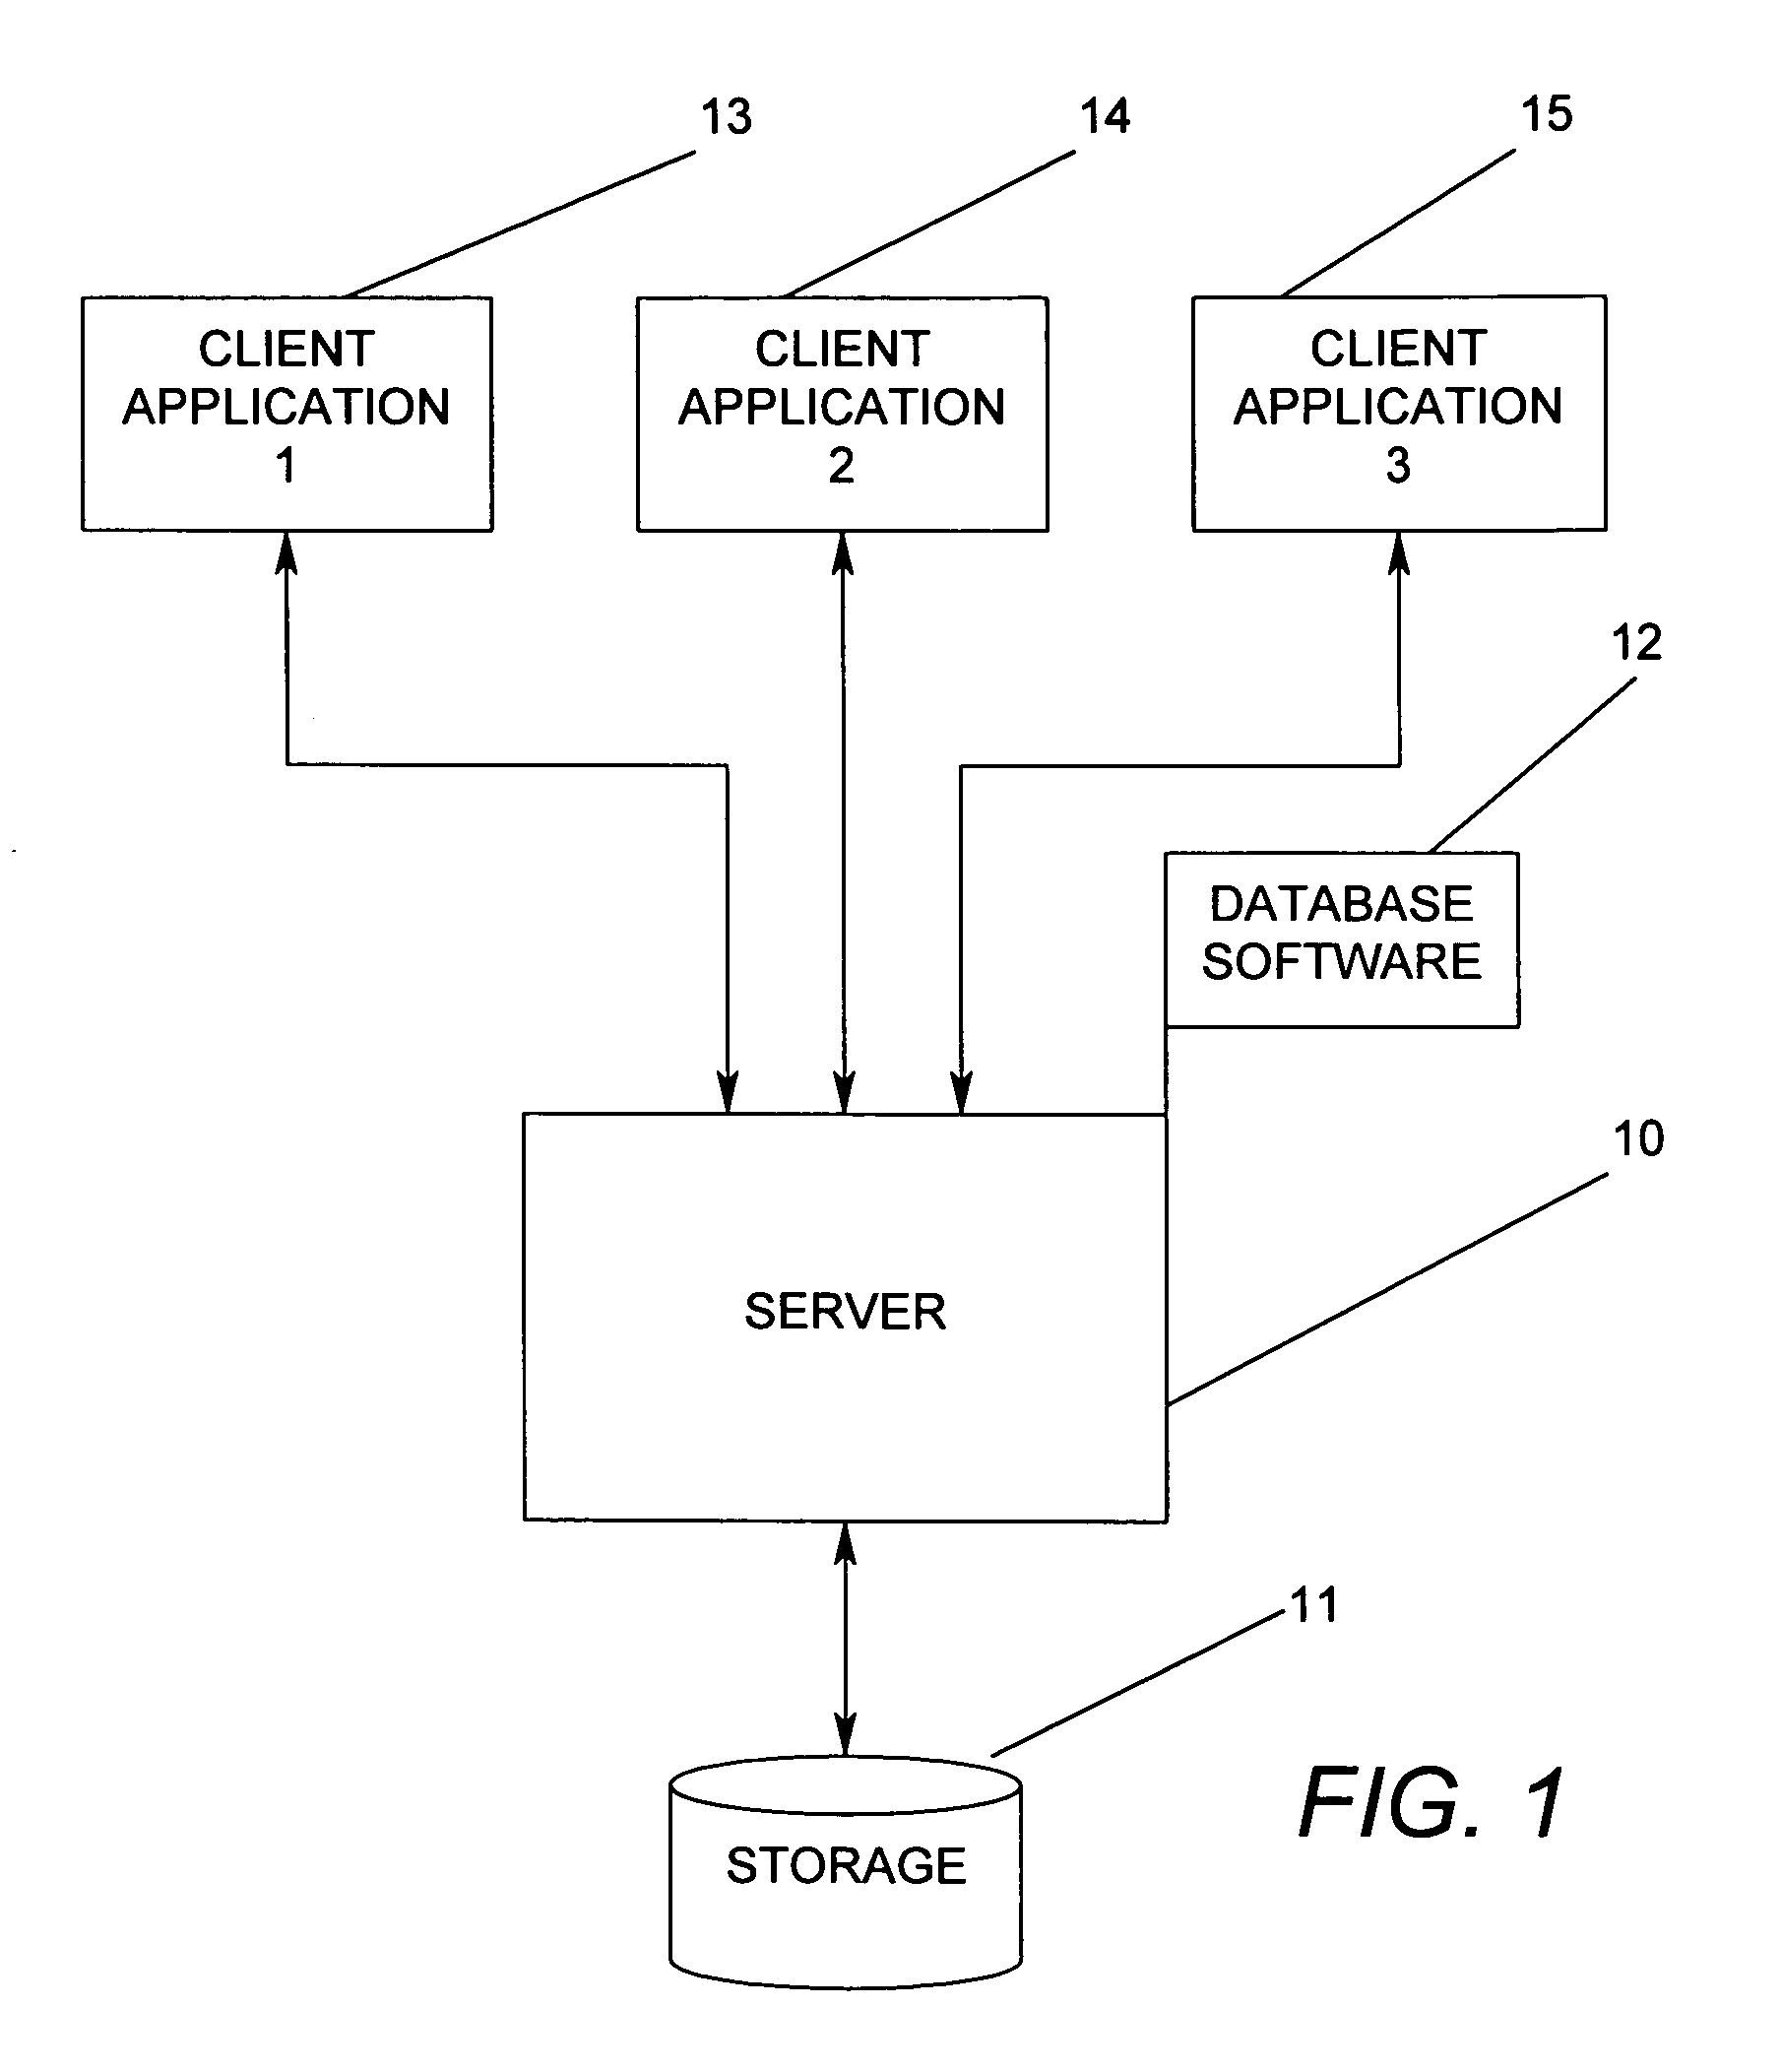 Method for generating unique object indentifiers in a data abstraction layer disposed between first and second DBMS software in response to parent thread performing client application